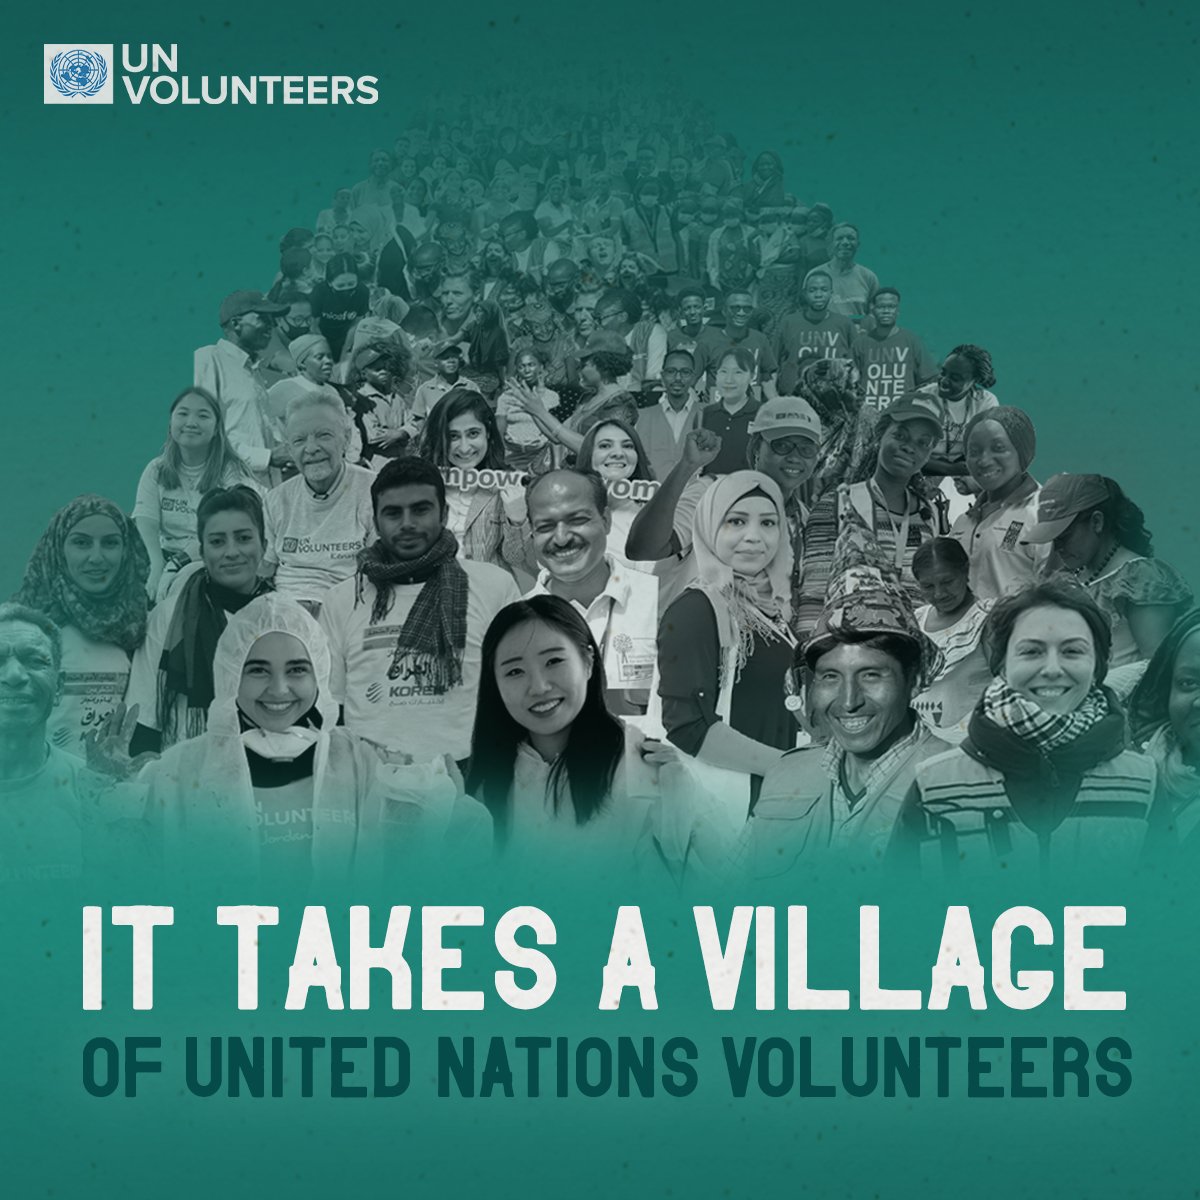 #ItTakesAVillage of humanitarians to deliver life-saving assistance every hour of every day.
#ItTakesAVillage of humanitarians to come together to ease suffering and bring hope.
#ItTakesAVolunteer commitment to support the well-being of humanity
#WorldhumanitarianDay2022